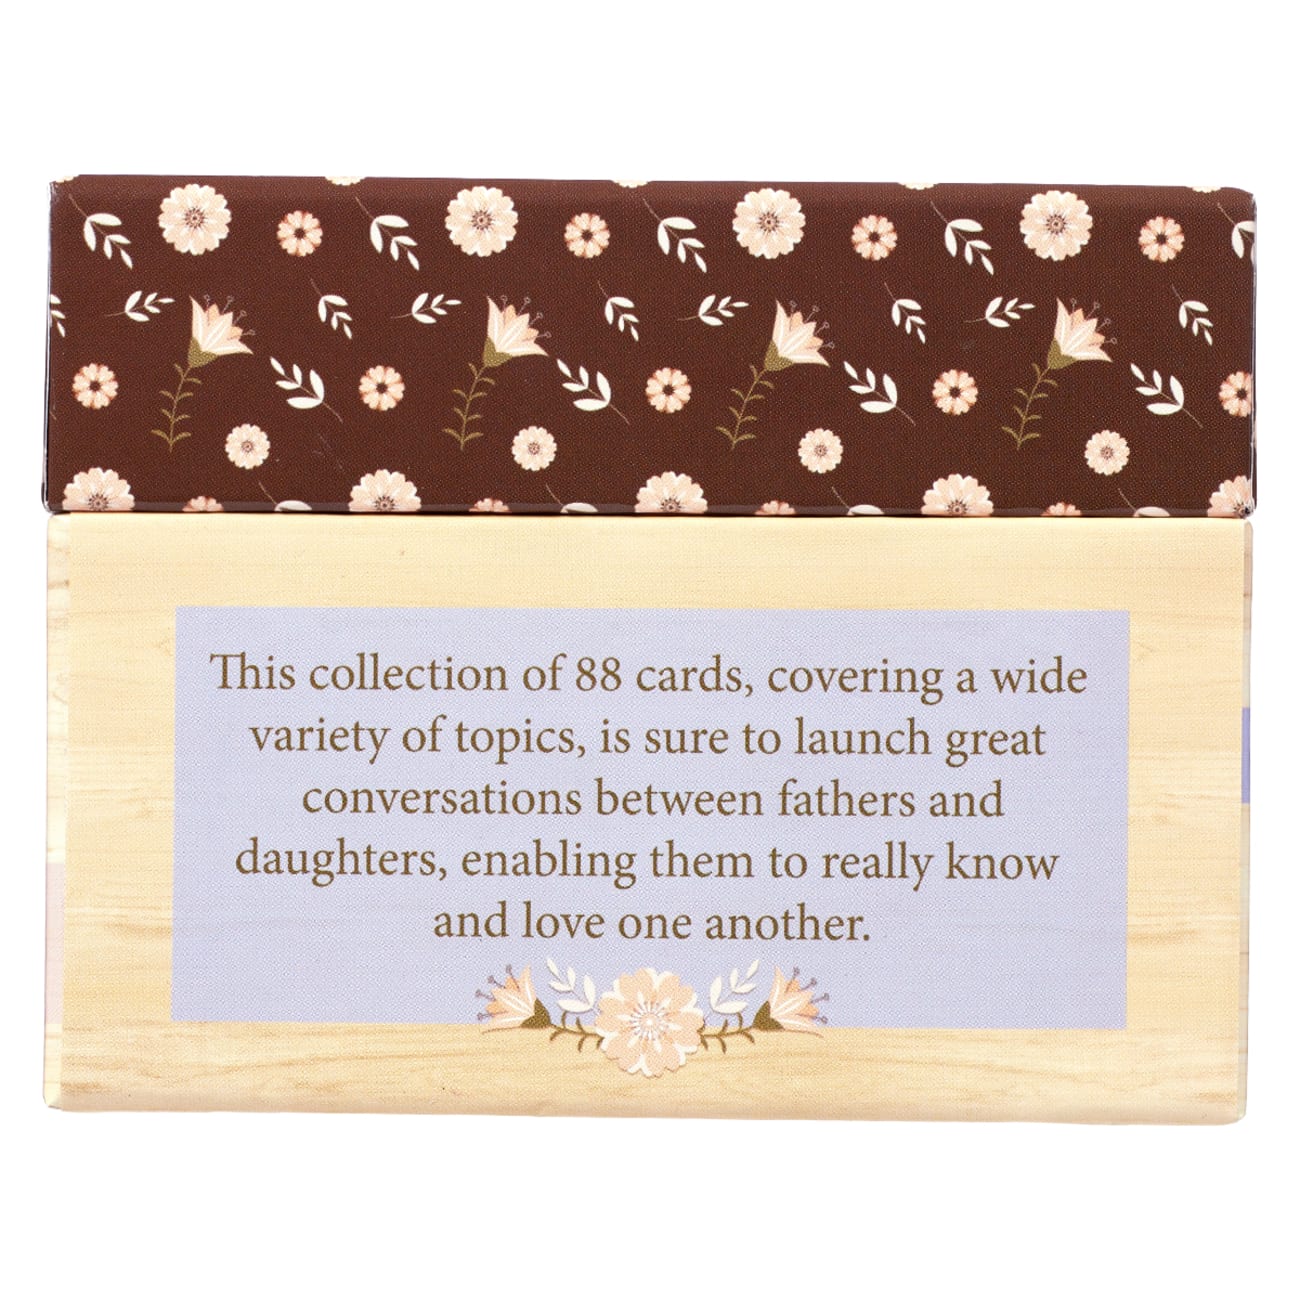 Conversation Starters: 88 Great Conversation Starters For Dads & Daughters Homeware